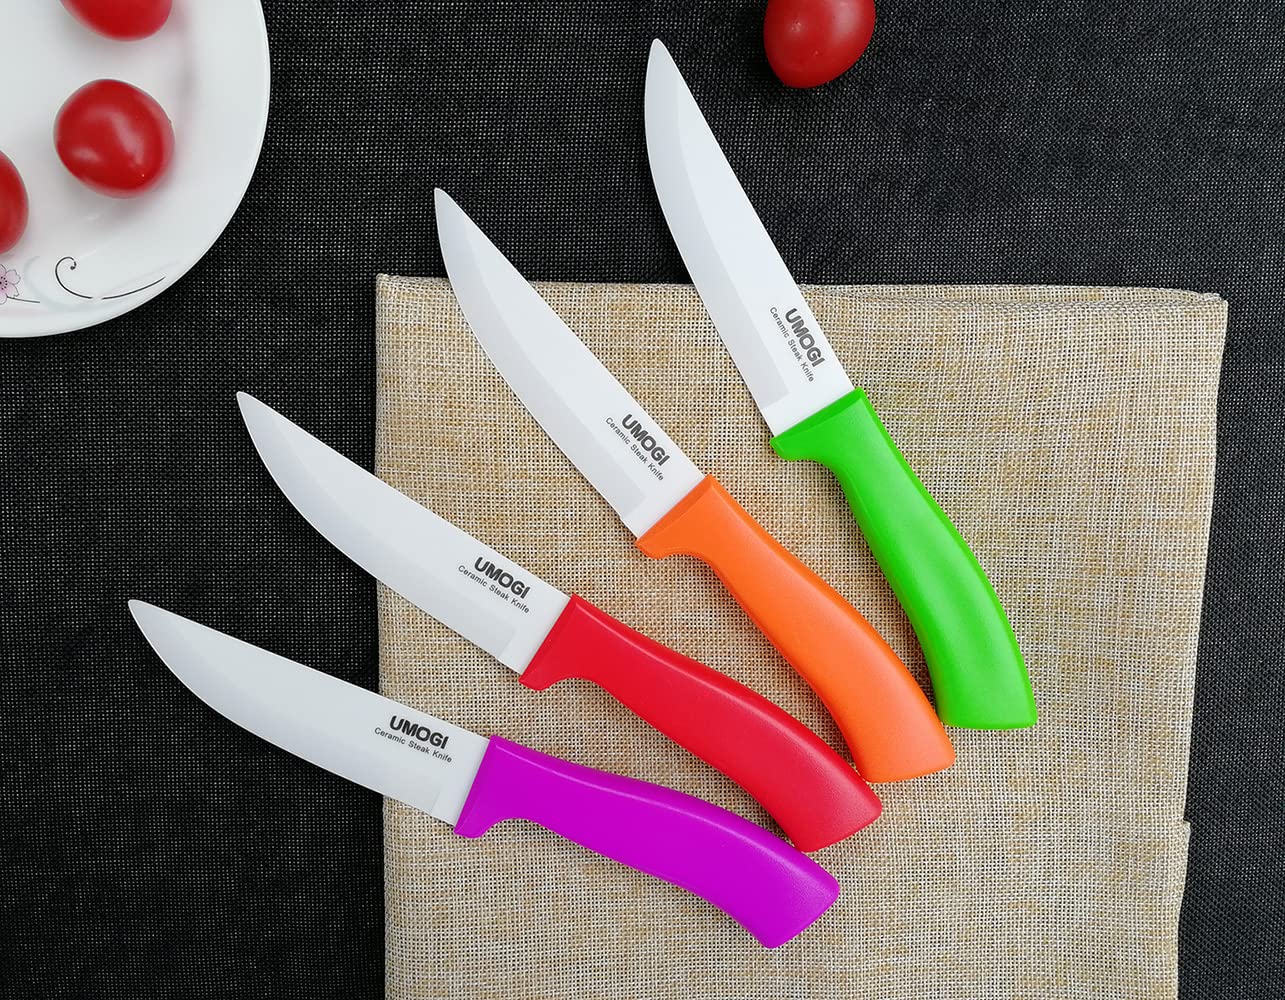 UMOGI Ceramic Steak Knives Set of 4 with Covers in Gift Box - Utility Knife Large Size - Healthy Stain Resistant & Rust Proof - Dishwasher Safe - Best for Meat Tomatoes Vegetables Fruits BBQ